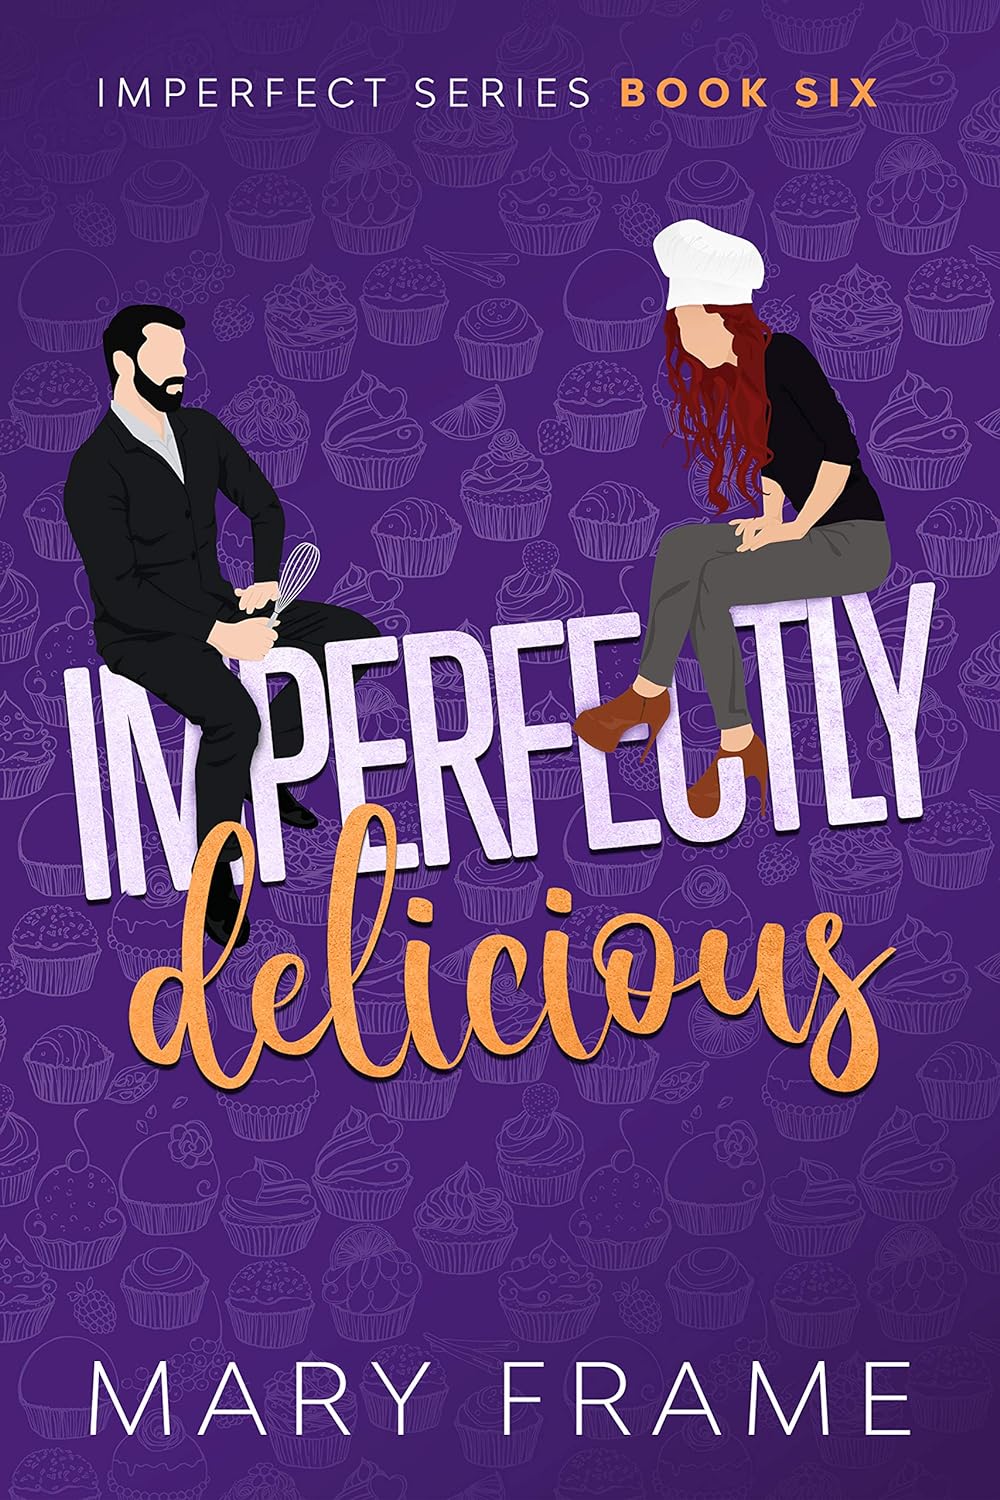 Imperfectly Delicious Romantic Comedy by Bestselling Author Mary Frame